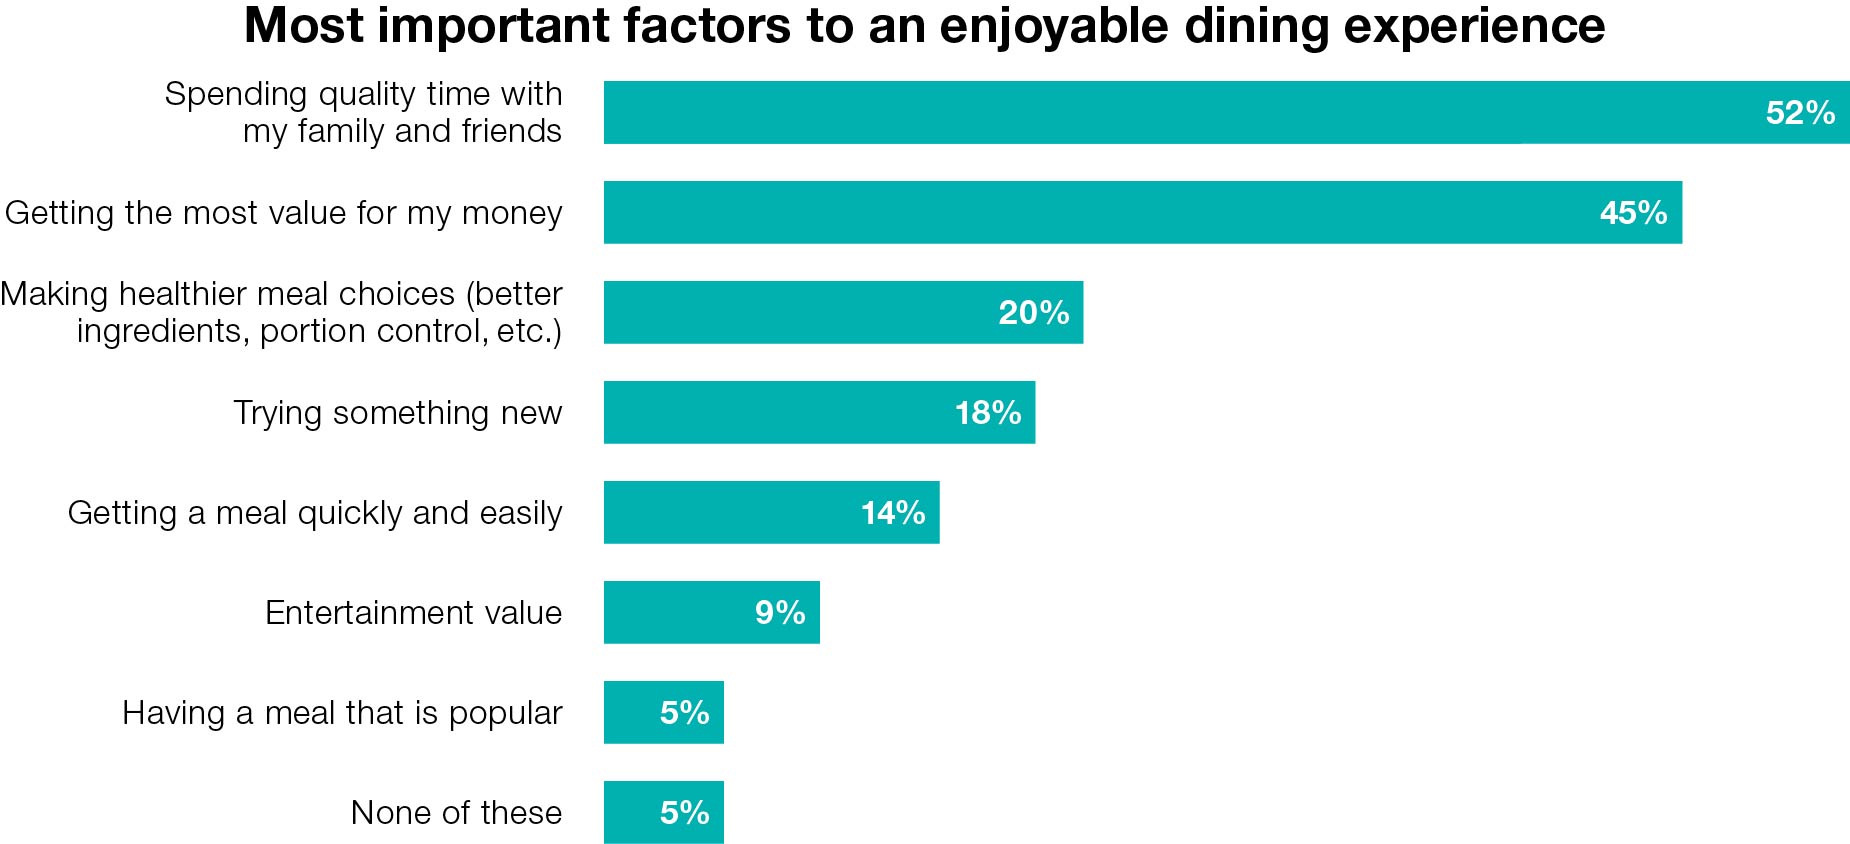 Chart depicting the most important factors to an enjoyable dining experience.